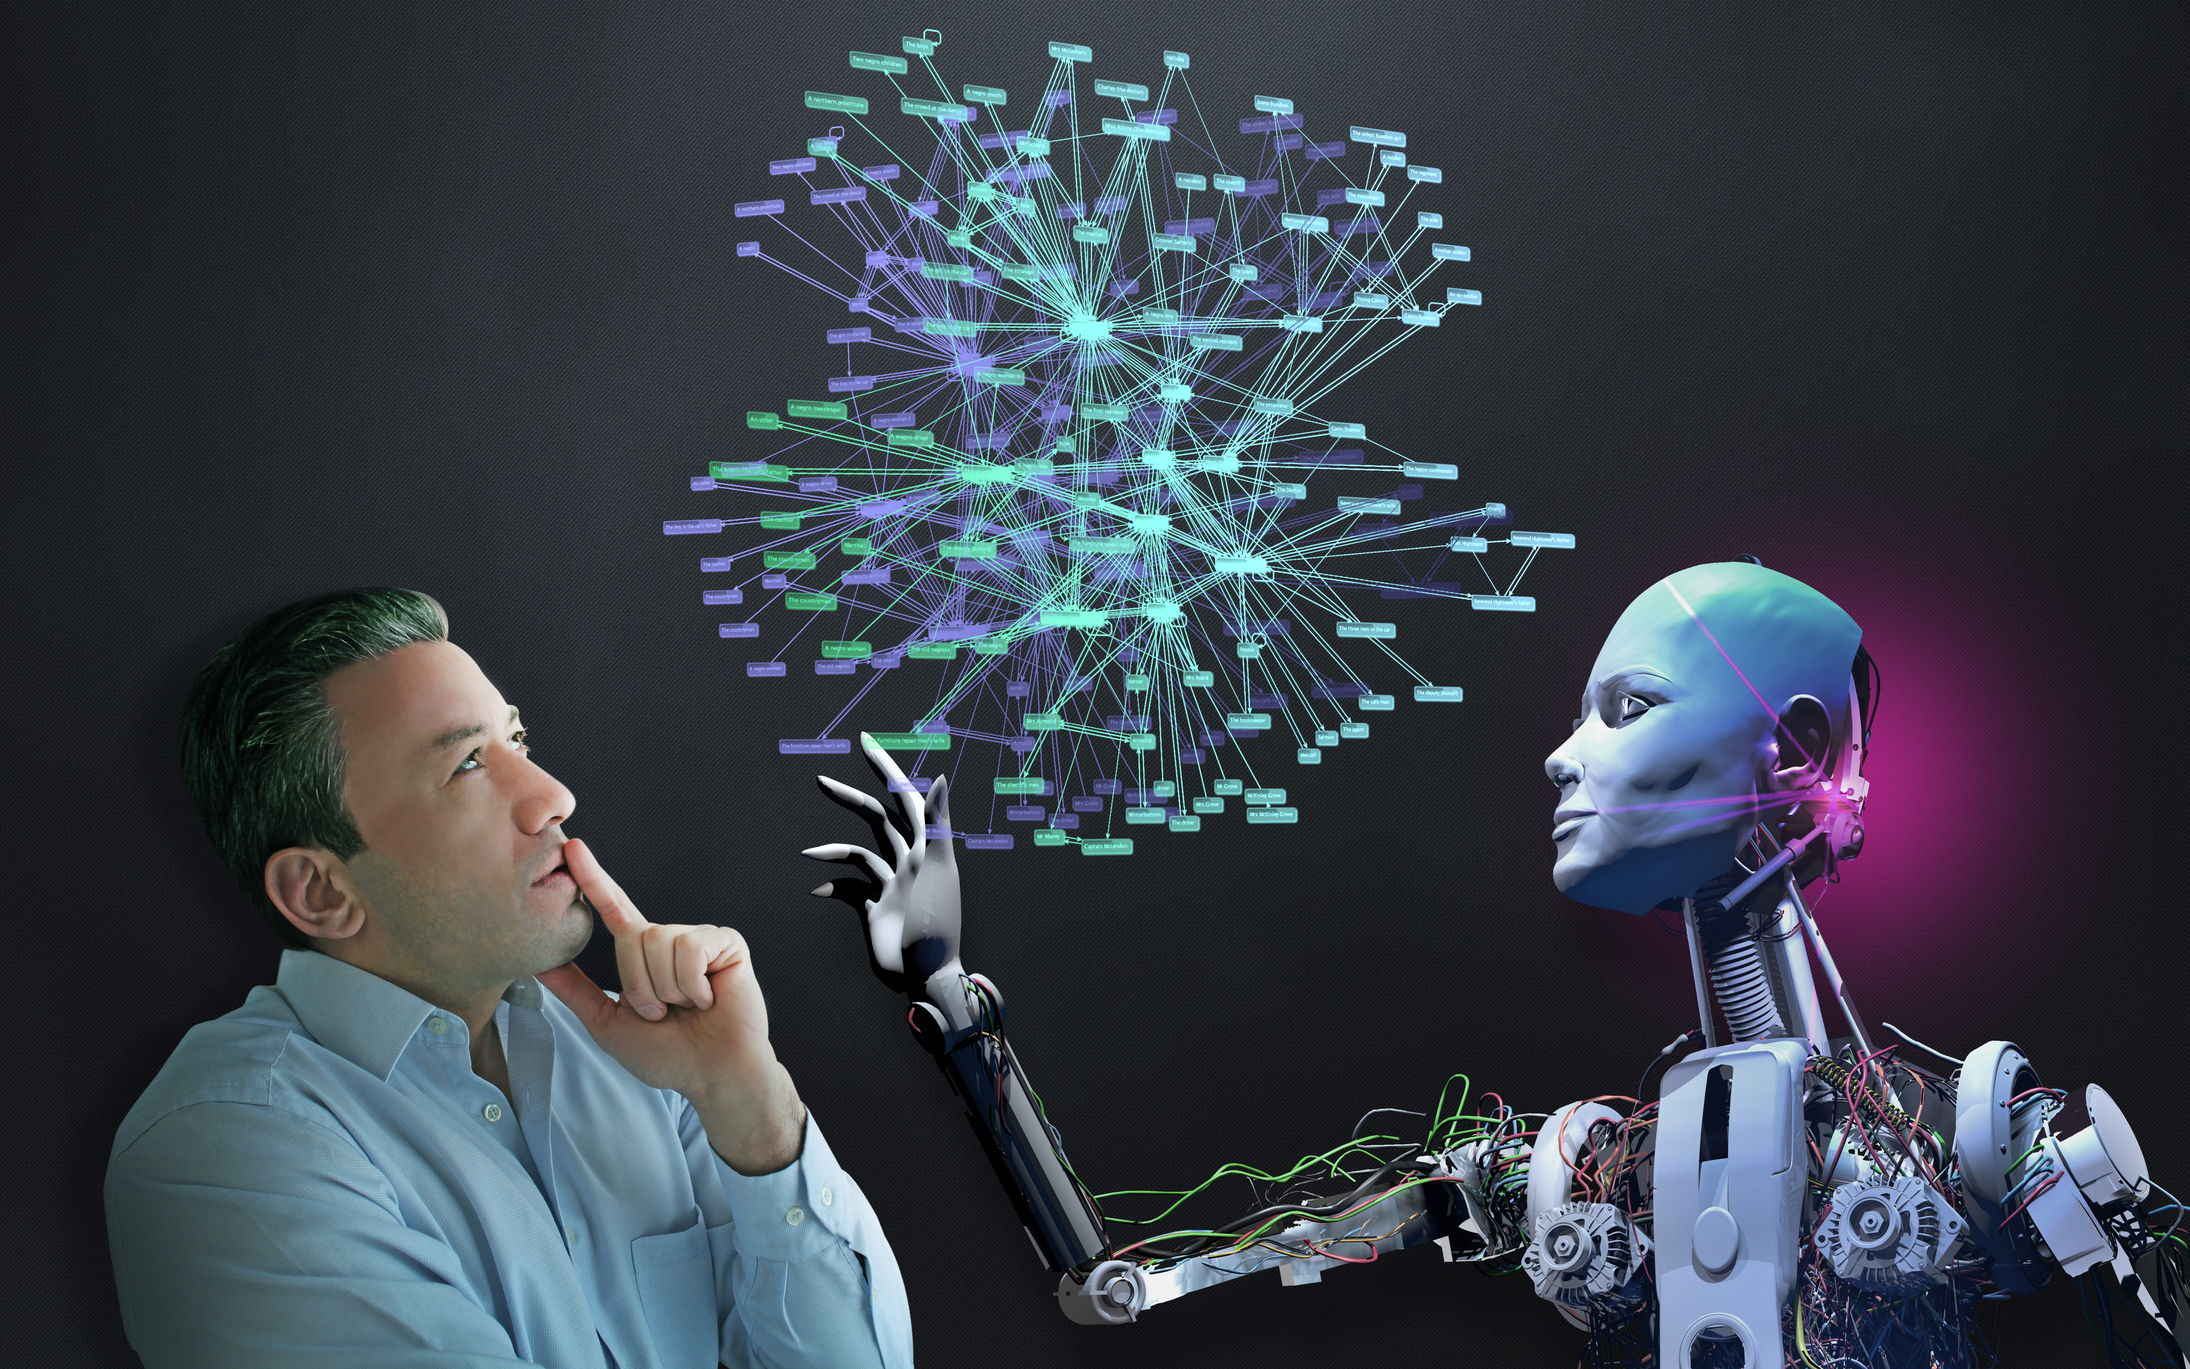 Human and robots to work together in the near future. This combination will accelerate developing technology. Businessman and cyborg organizes social media.